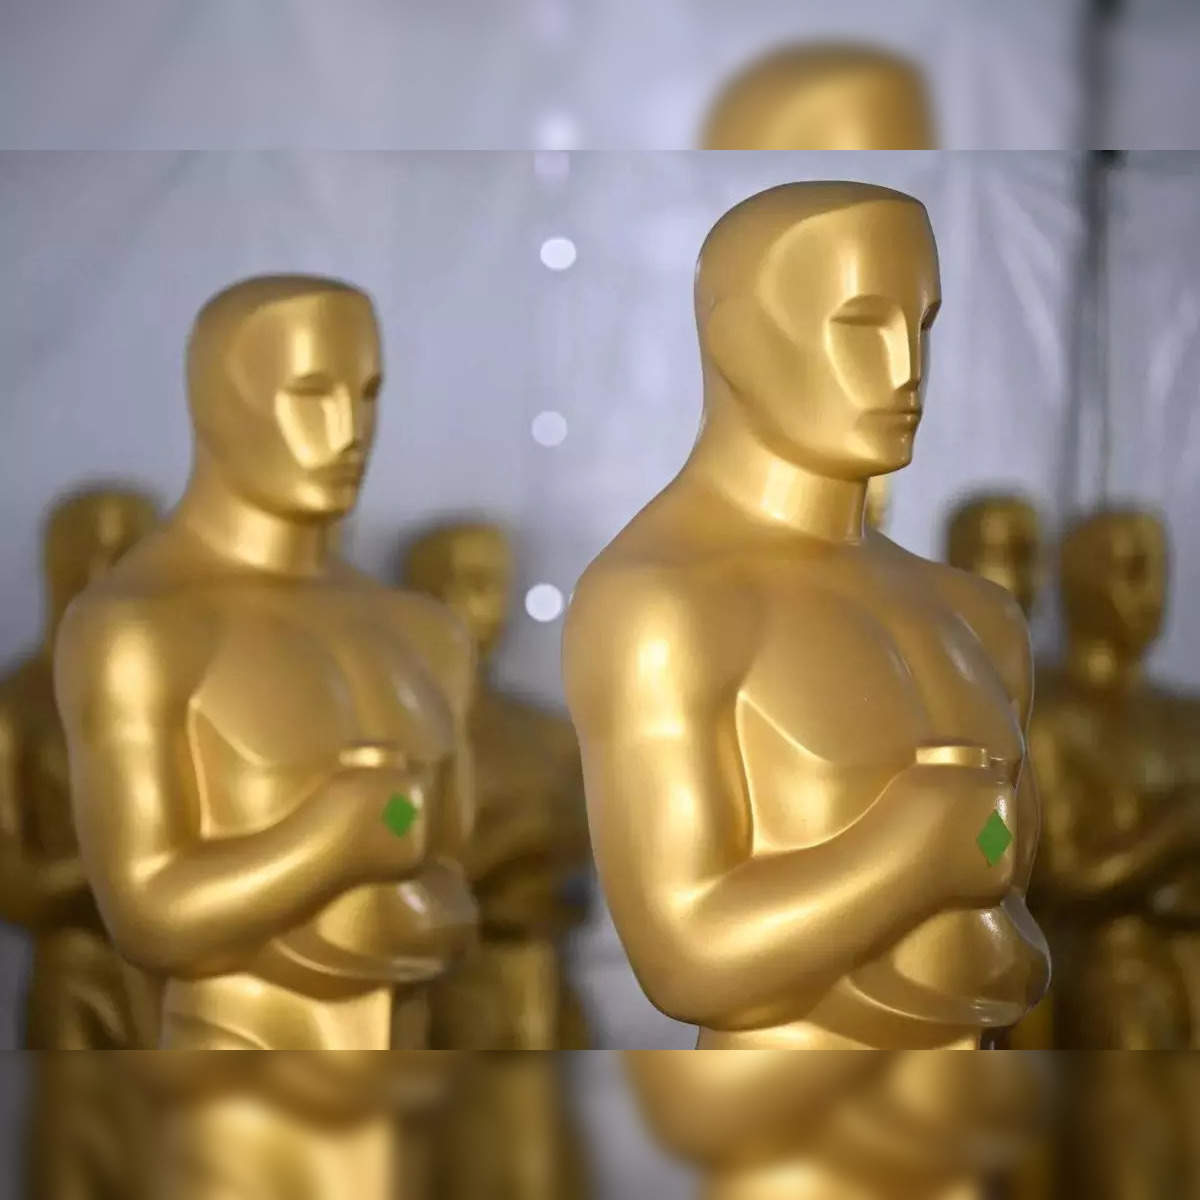 Oscars 2021: When, where and how to watch Academy Awards live in India? All  you need to know